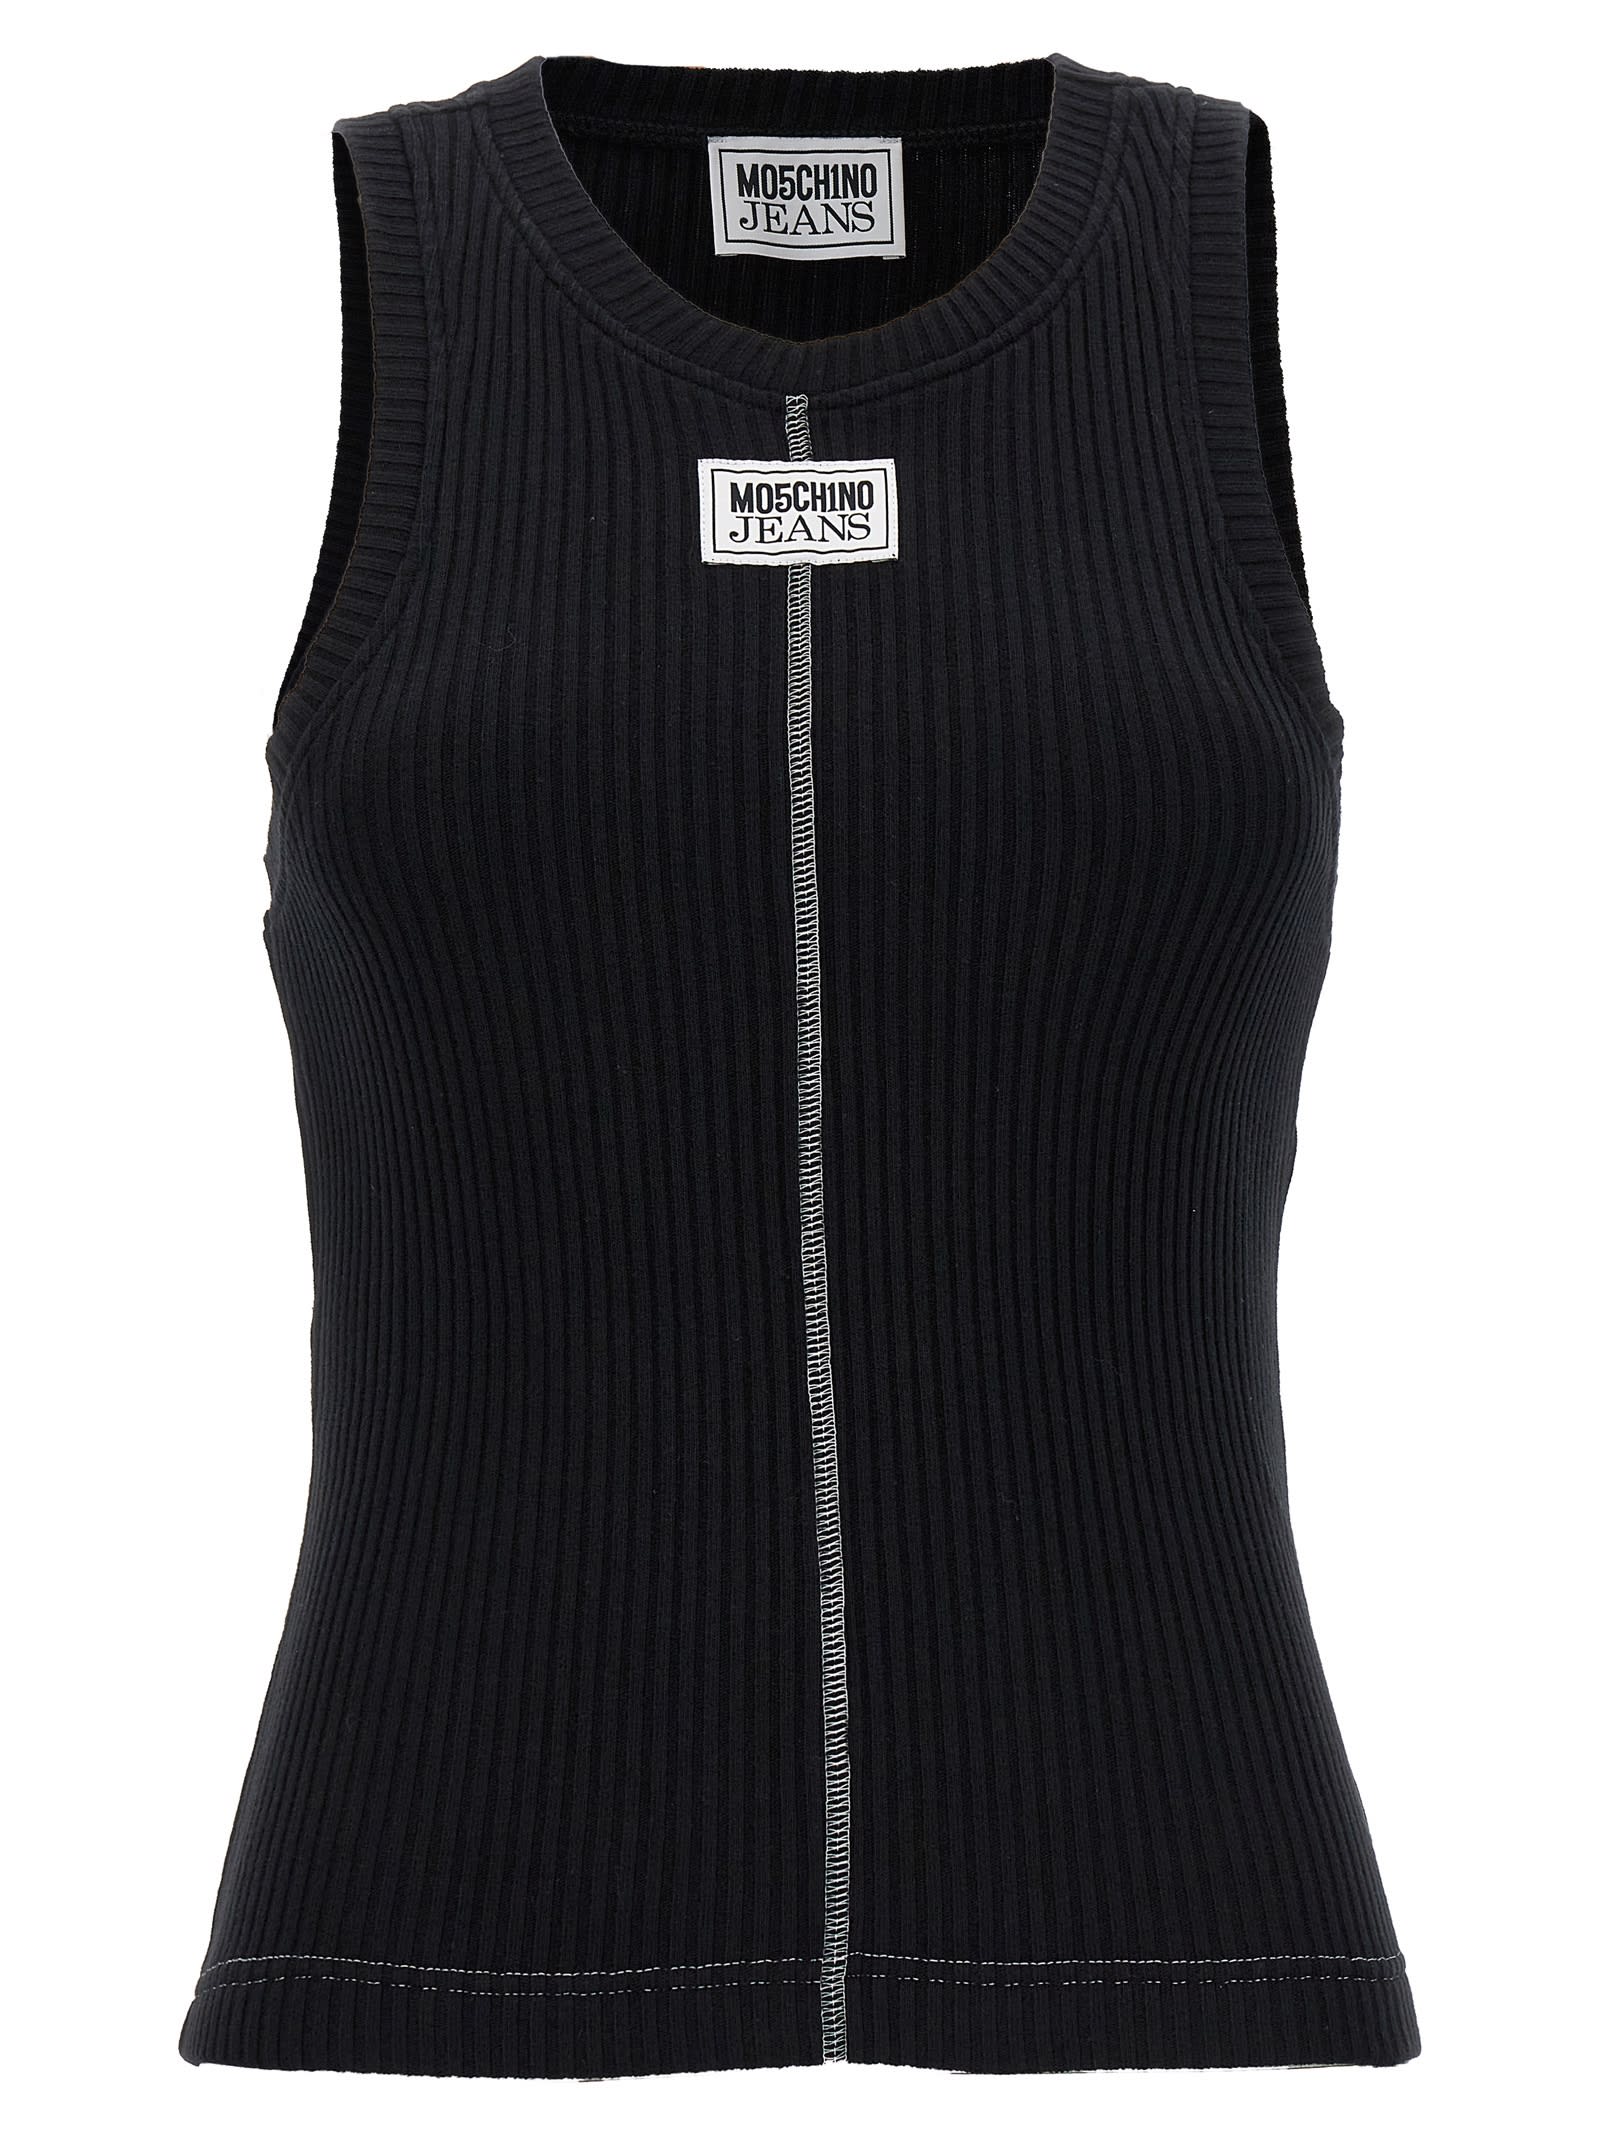 Moschino Logo Patch Tank Top In Black